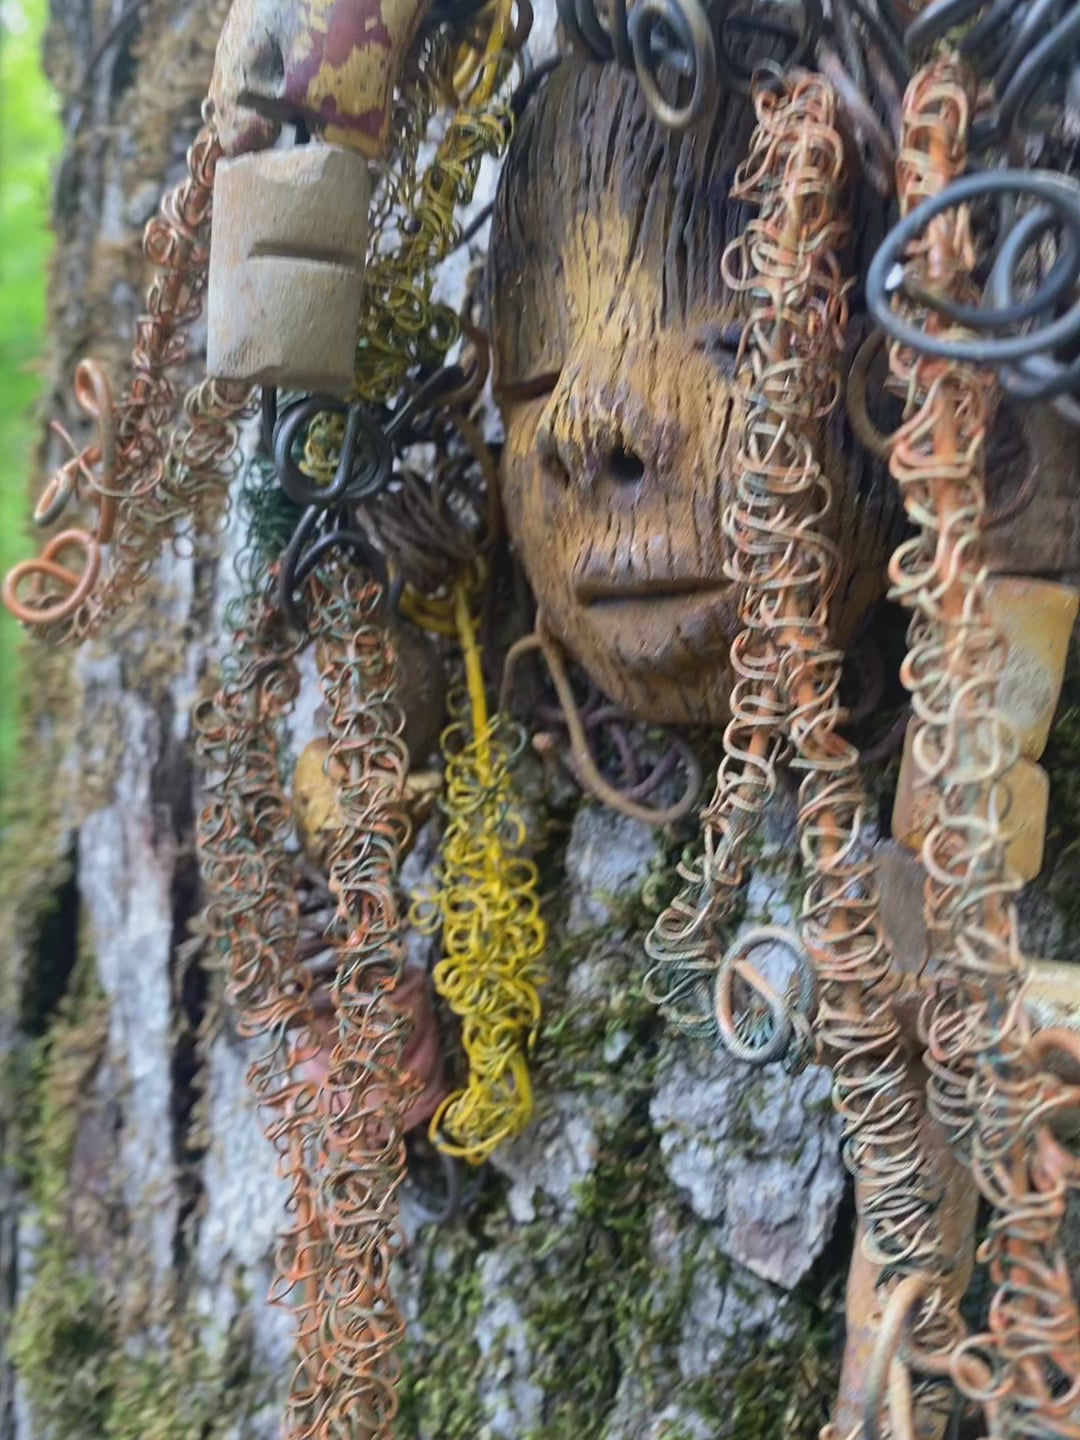 Vetti is 6”x8 ” and weighs 4.6 ozs. She has a two tone copper brown complexion. Vetti has big hair with several spiral coils handmade Raku beads. Over 30 ft of hand twisted 16 and 24 gauge wire!